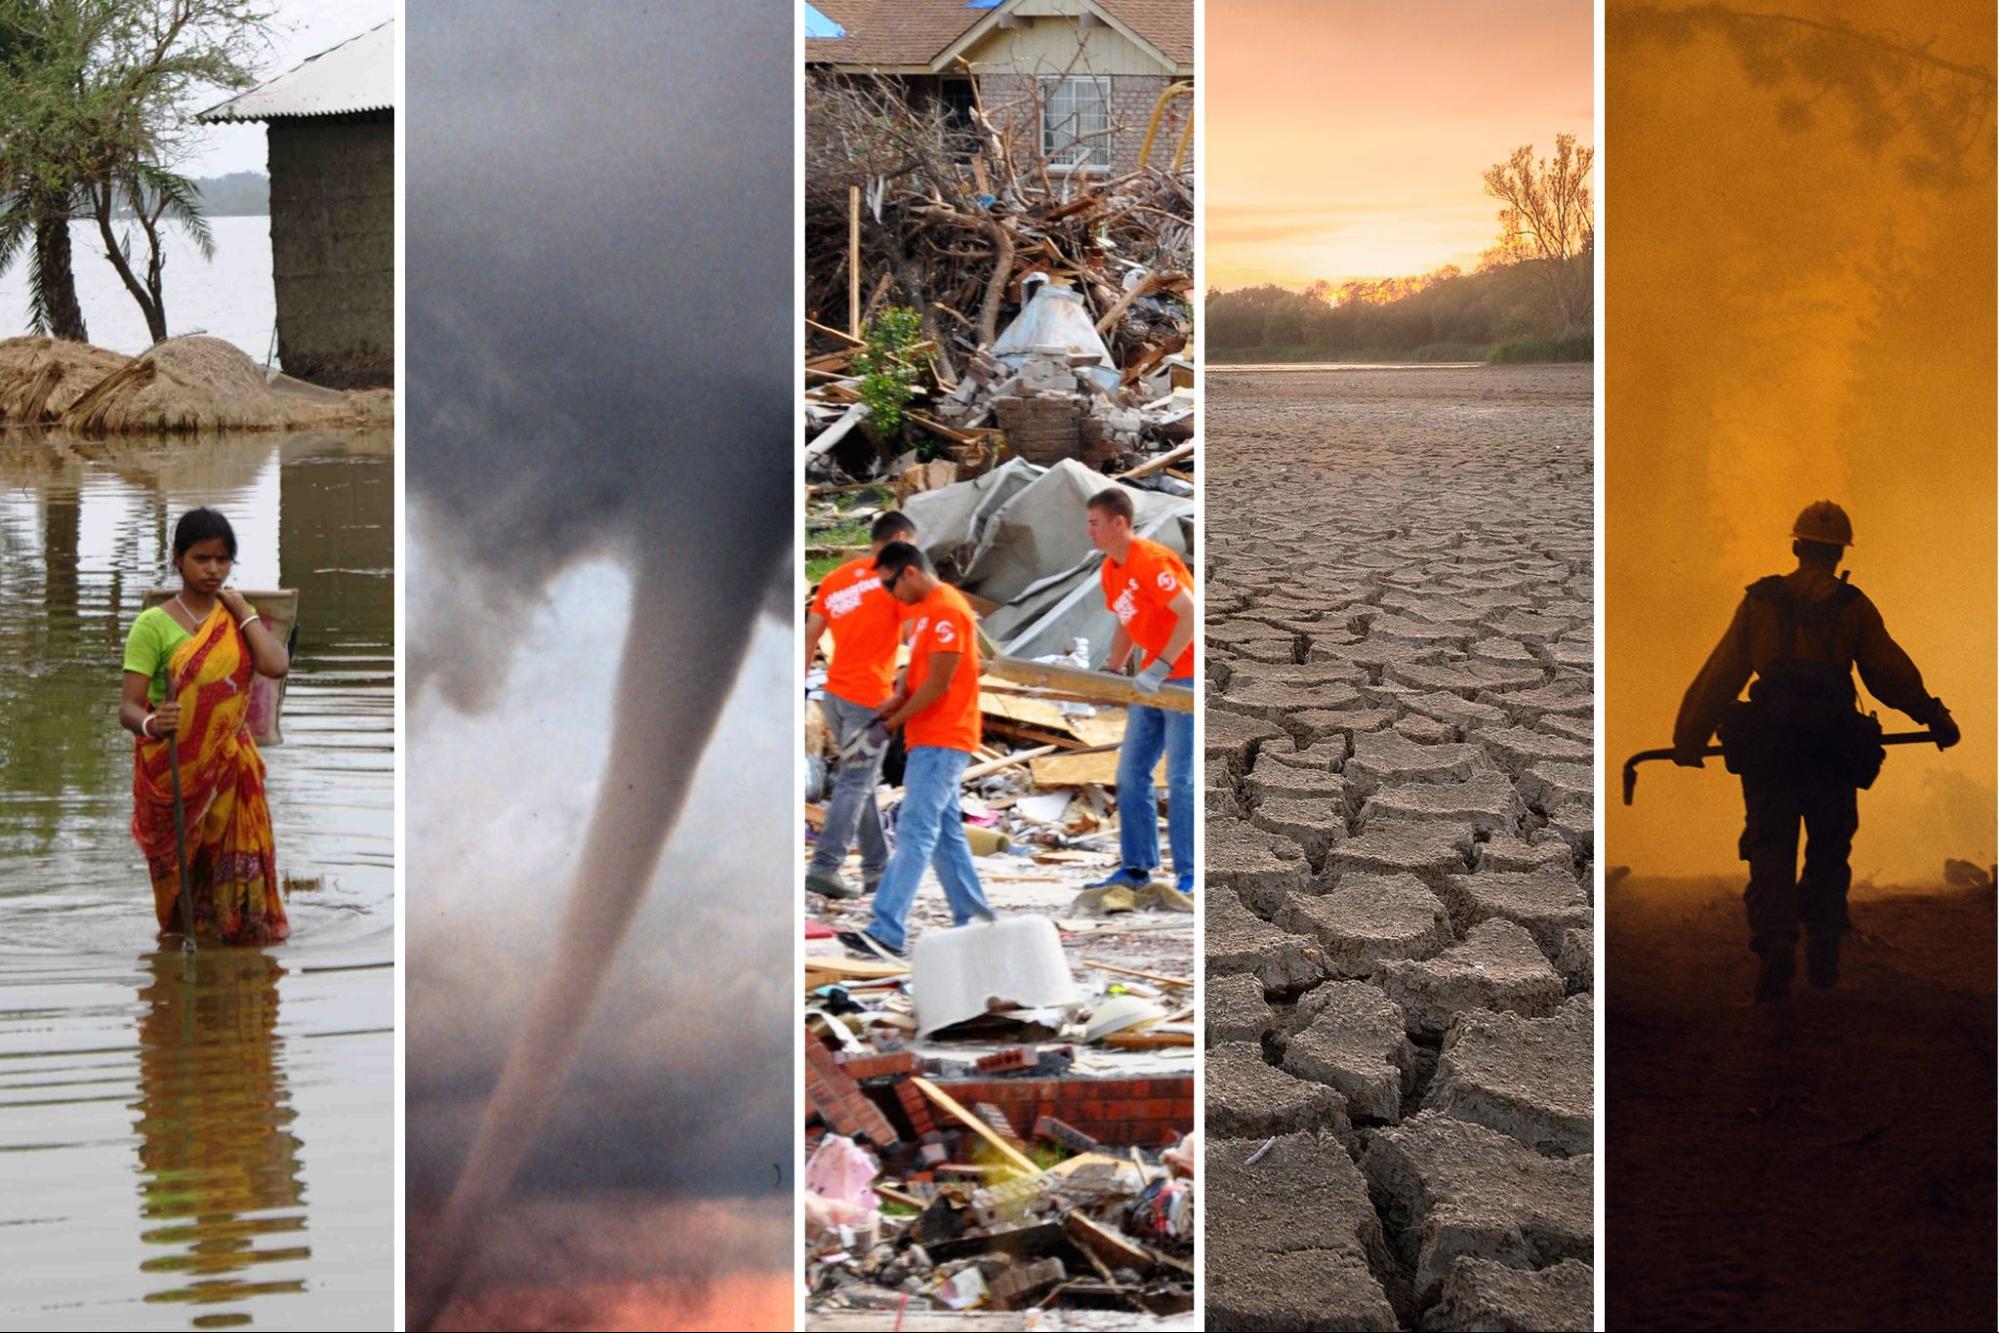 If We Can’t Stop Climate Change, We Must Get Better at Climate Preparedness.